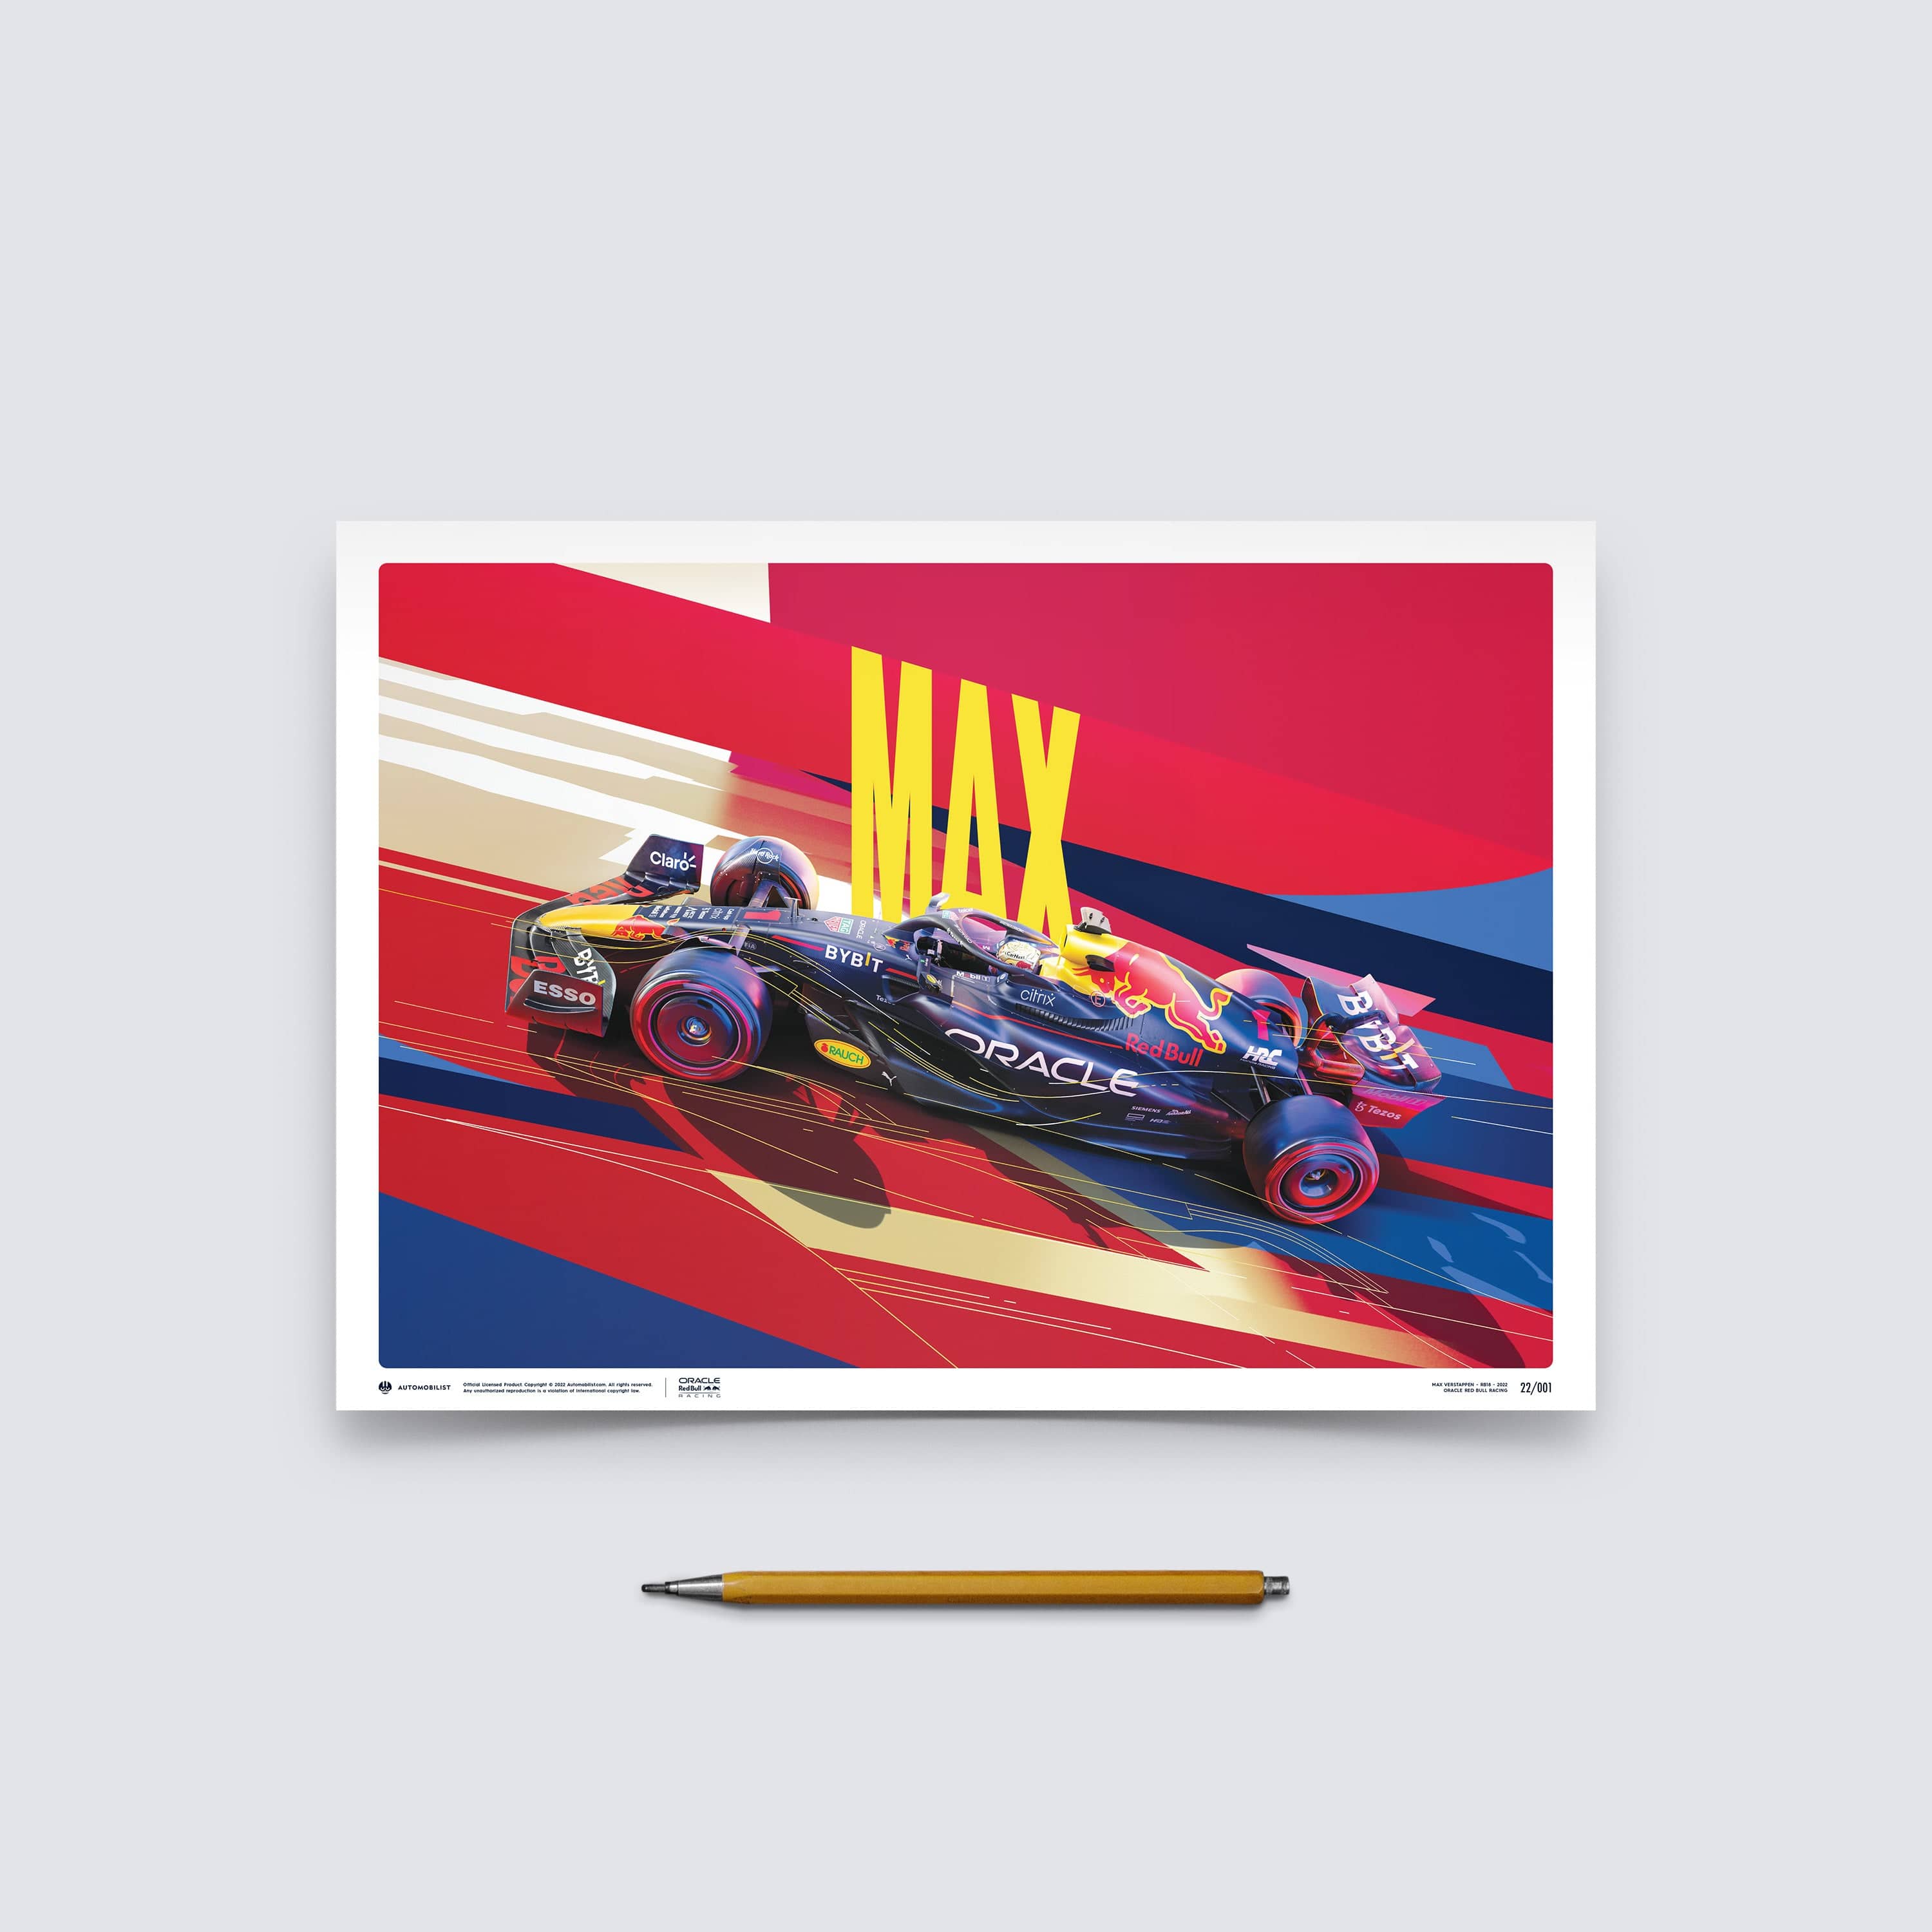 Oracle Red Bull Racing Official Online Store